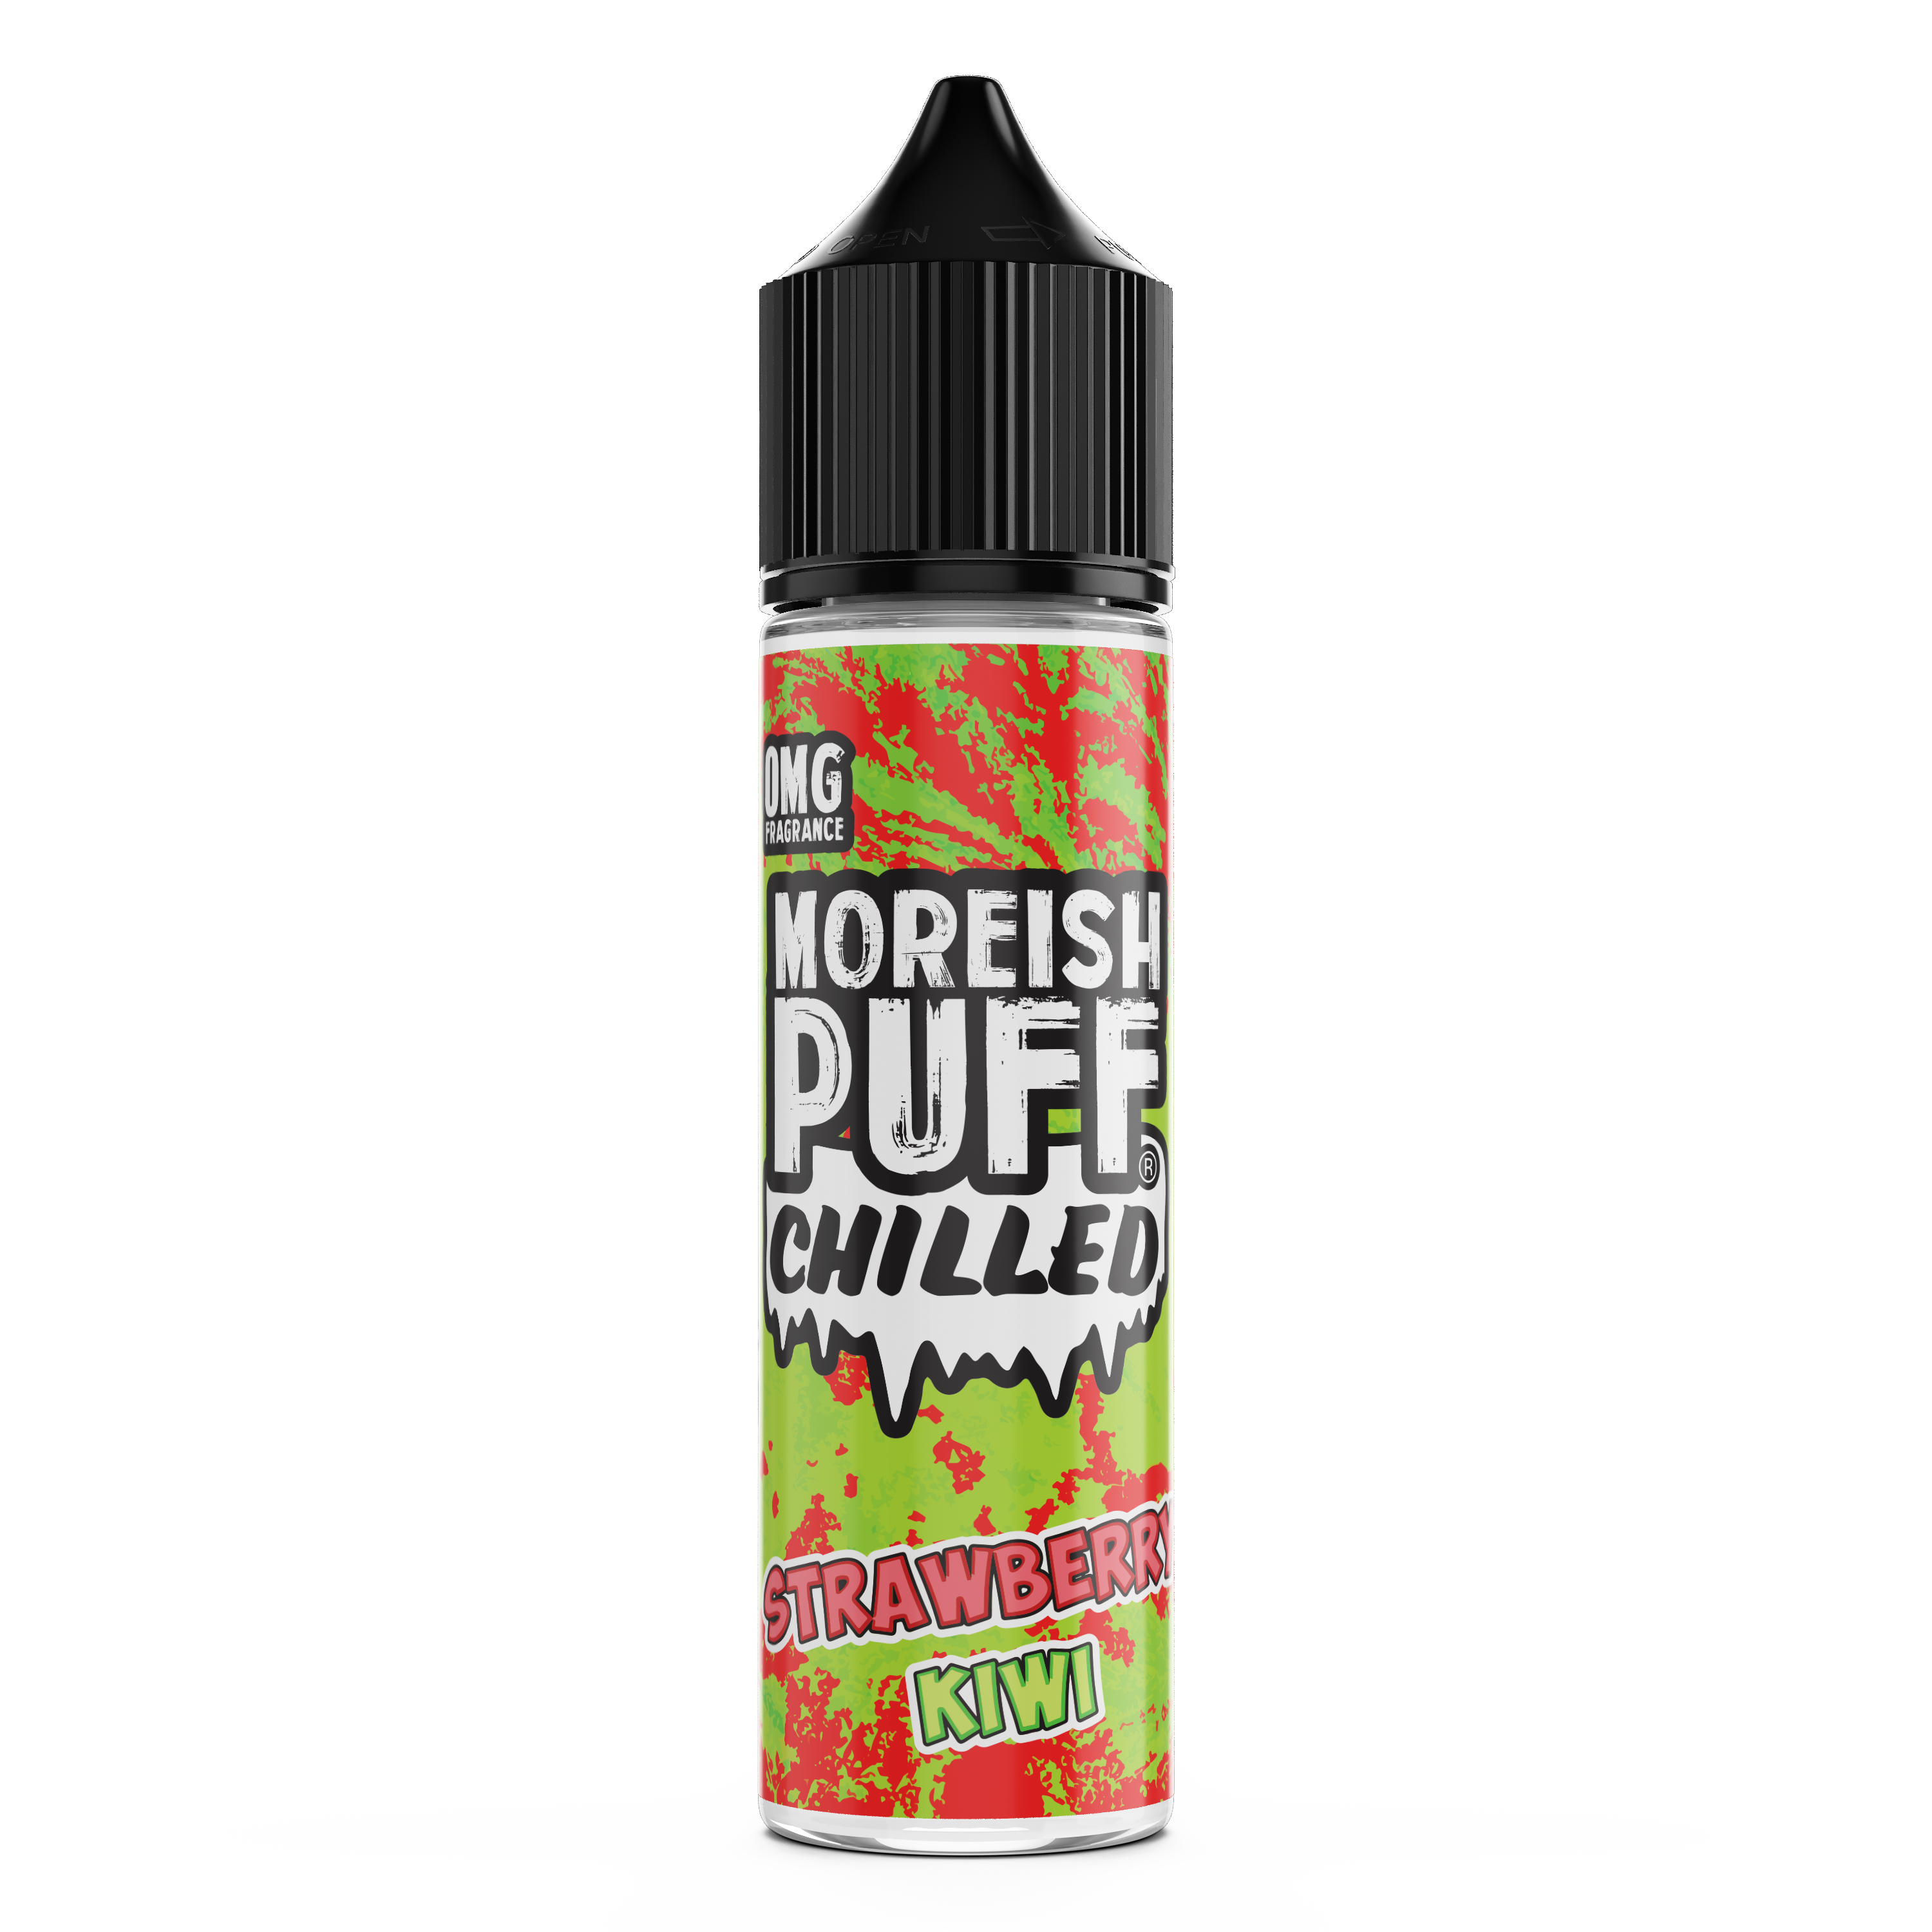 Strawberry and Kiwi Chilled E-liquid by Moreish Puff 50ml Short Fill